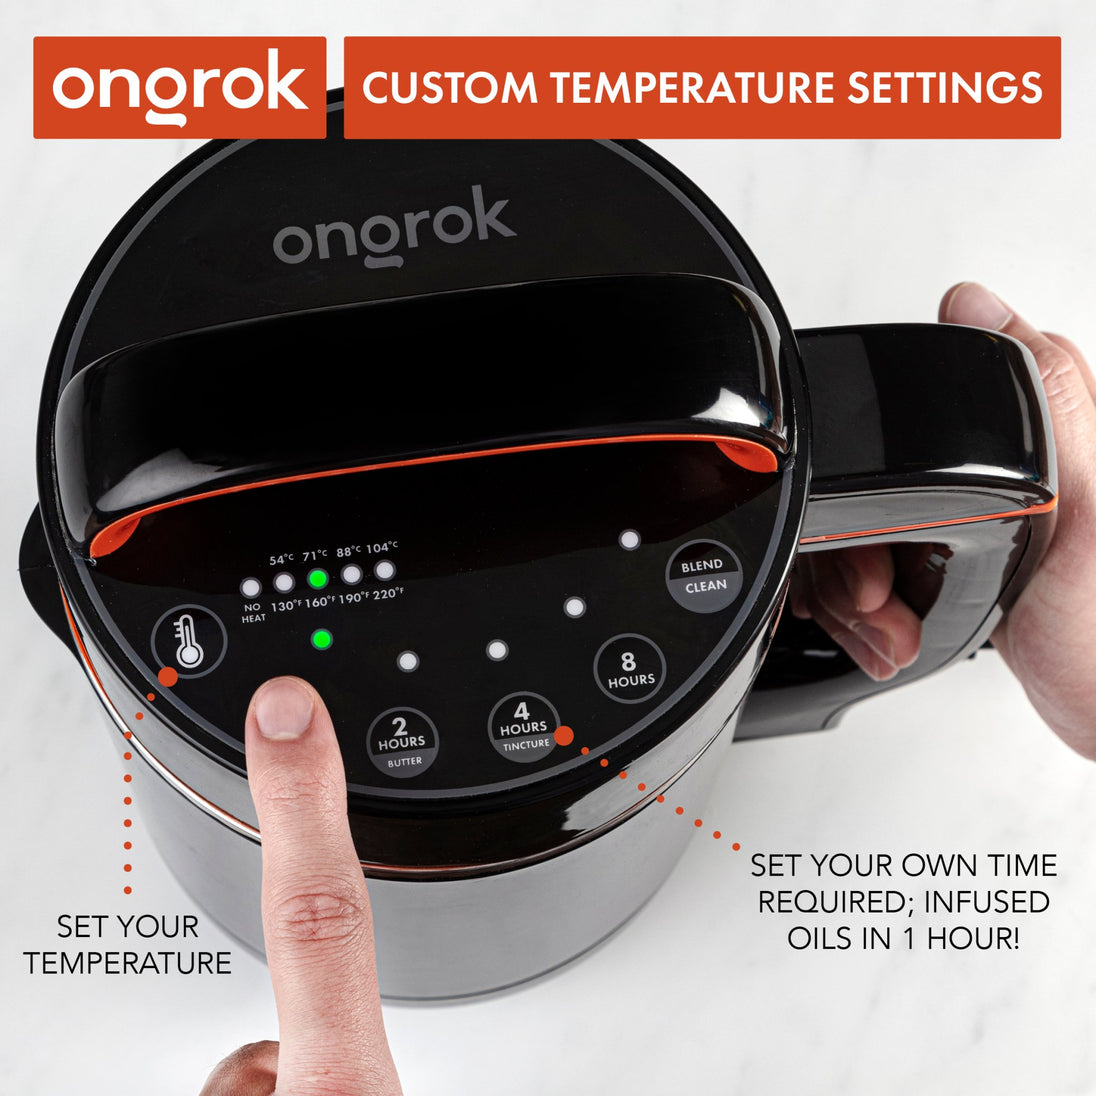 Ongrok Small Botanical Infuser Machine and Kit - Glasss Station